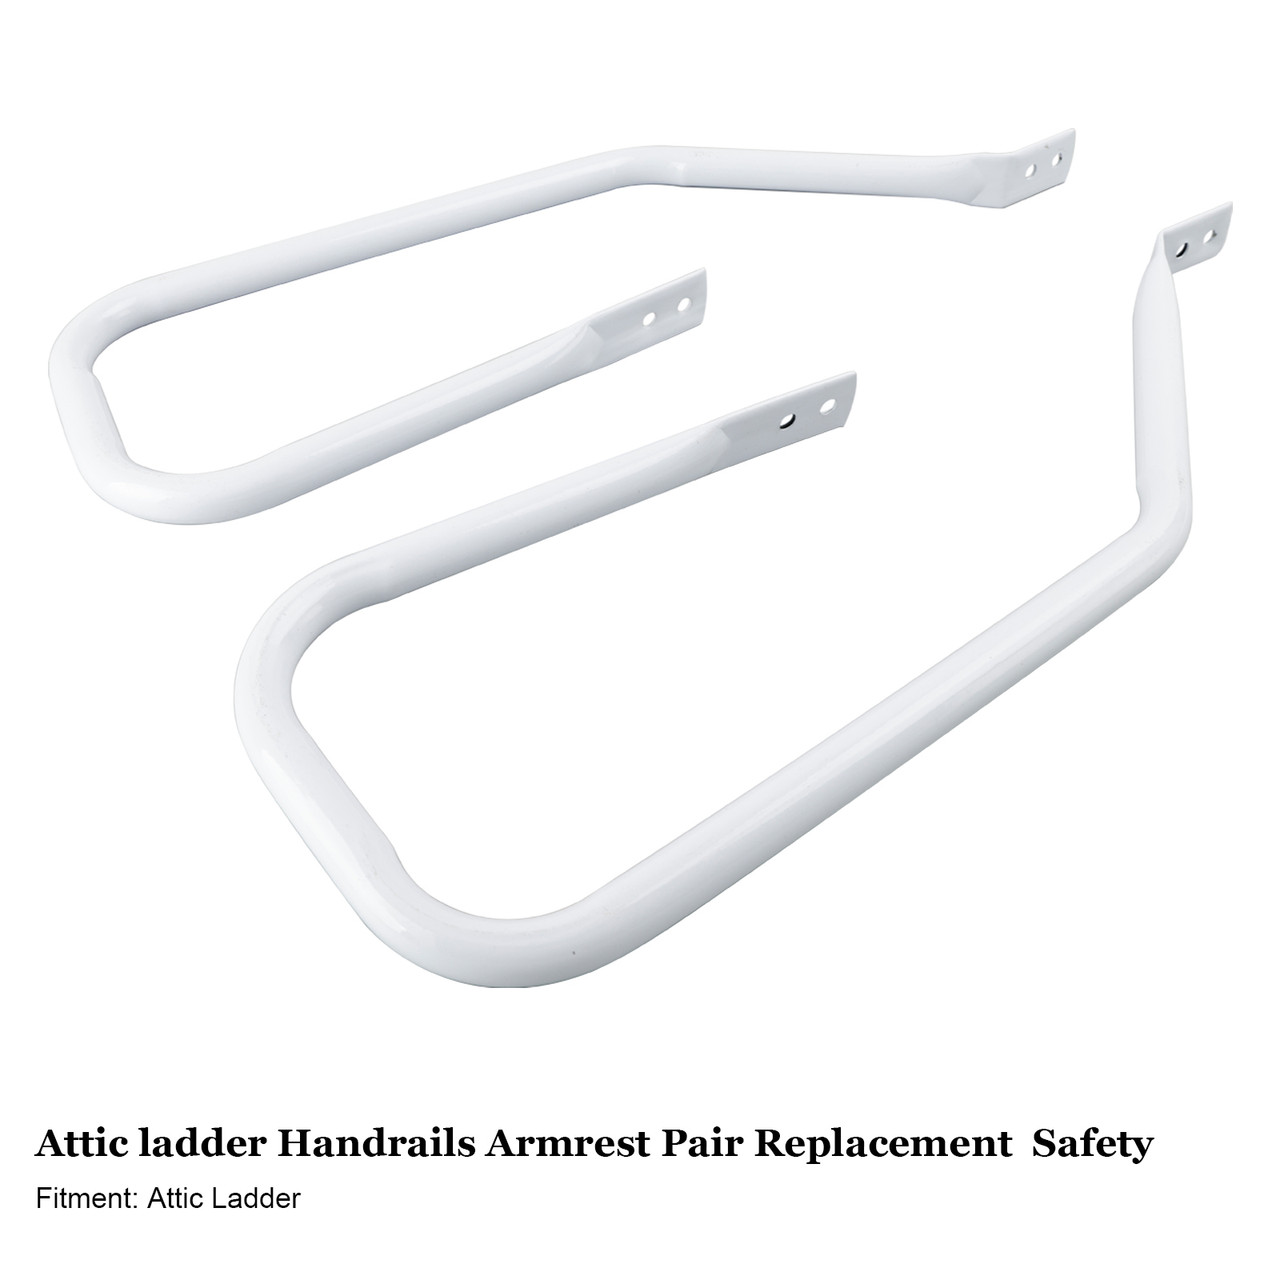 Attic ladder Handrails Armrest Pair Replacement  Safety